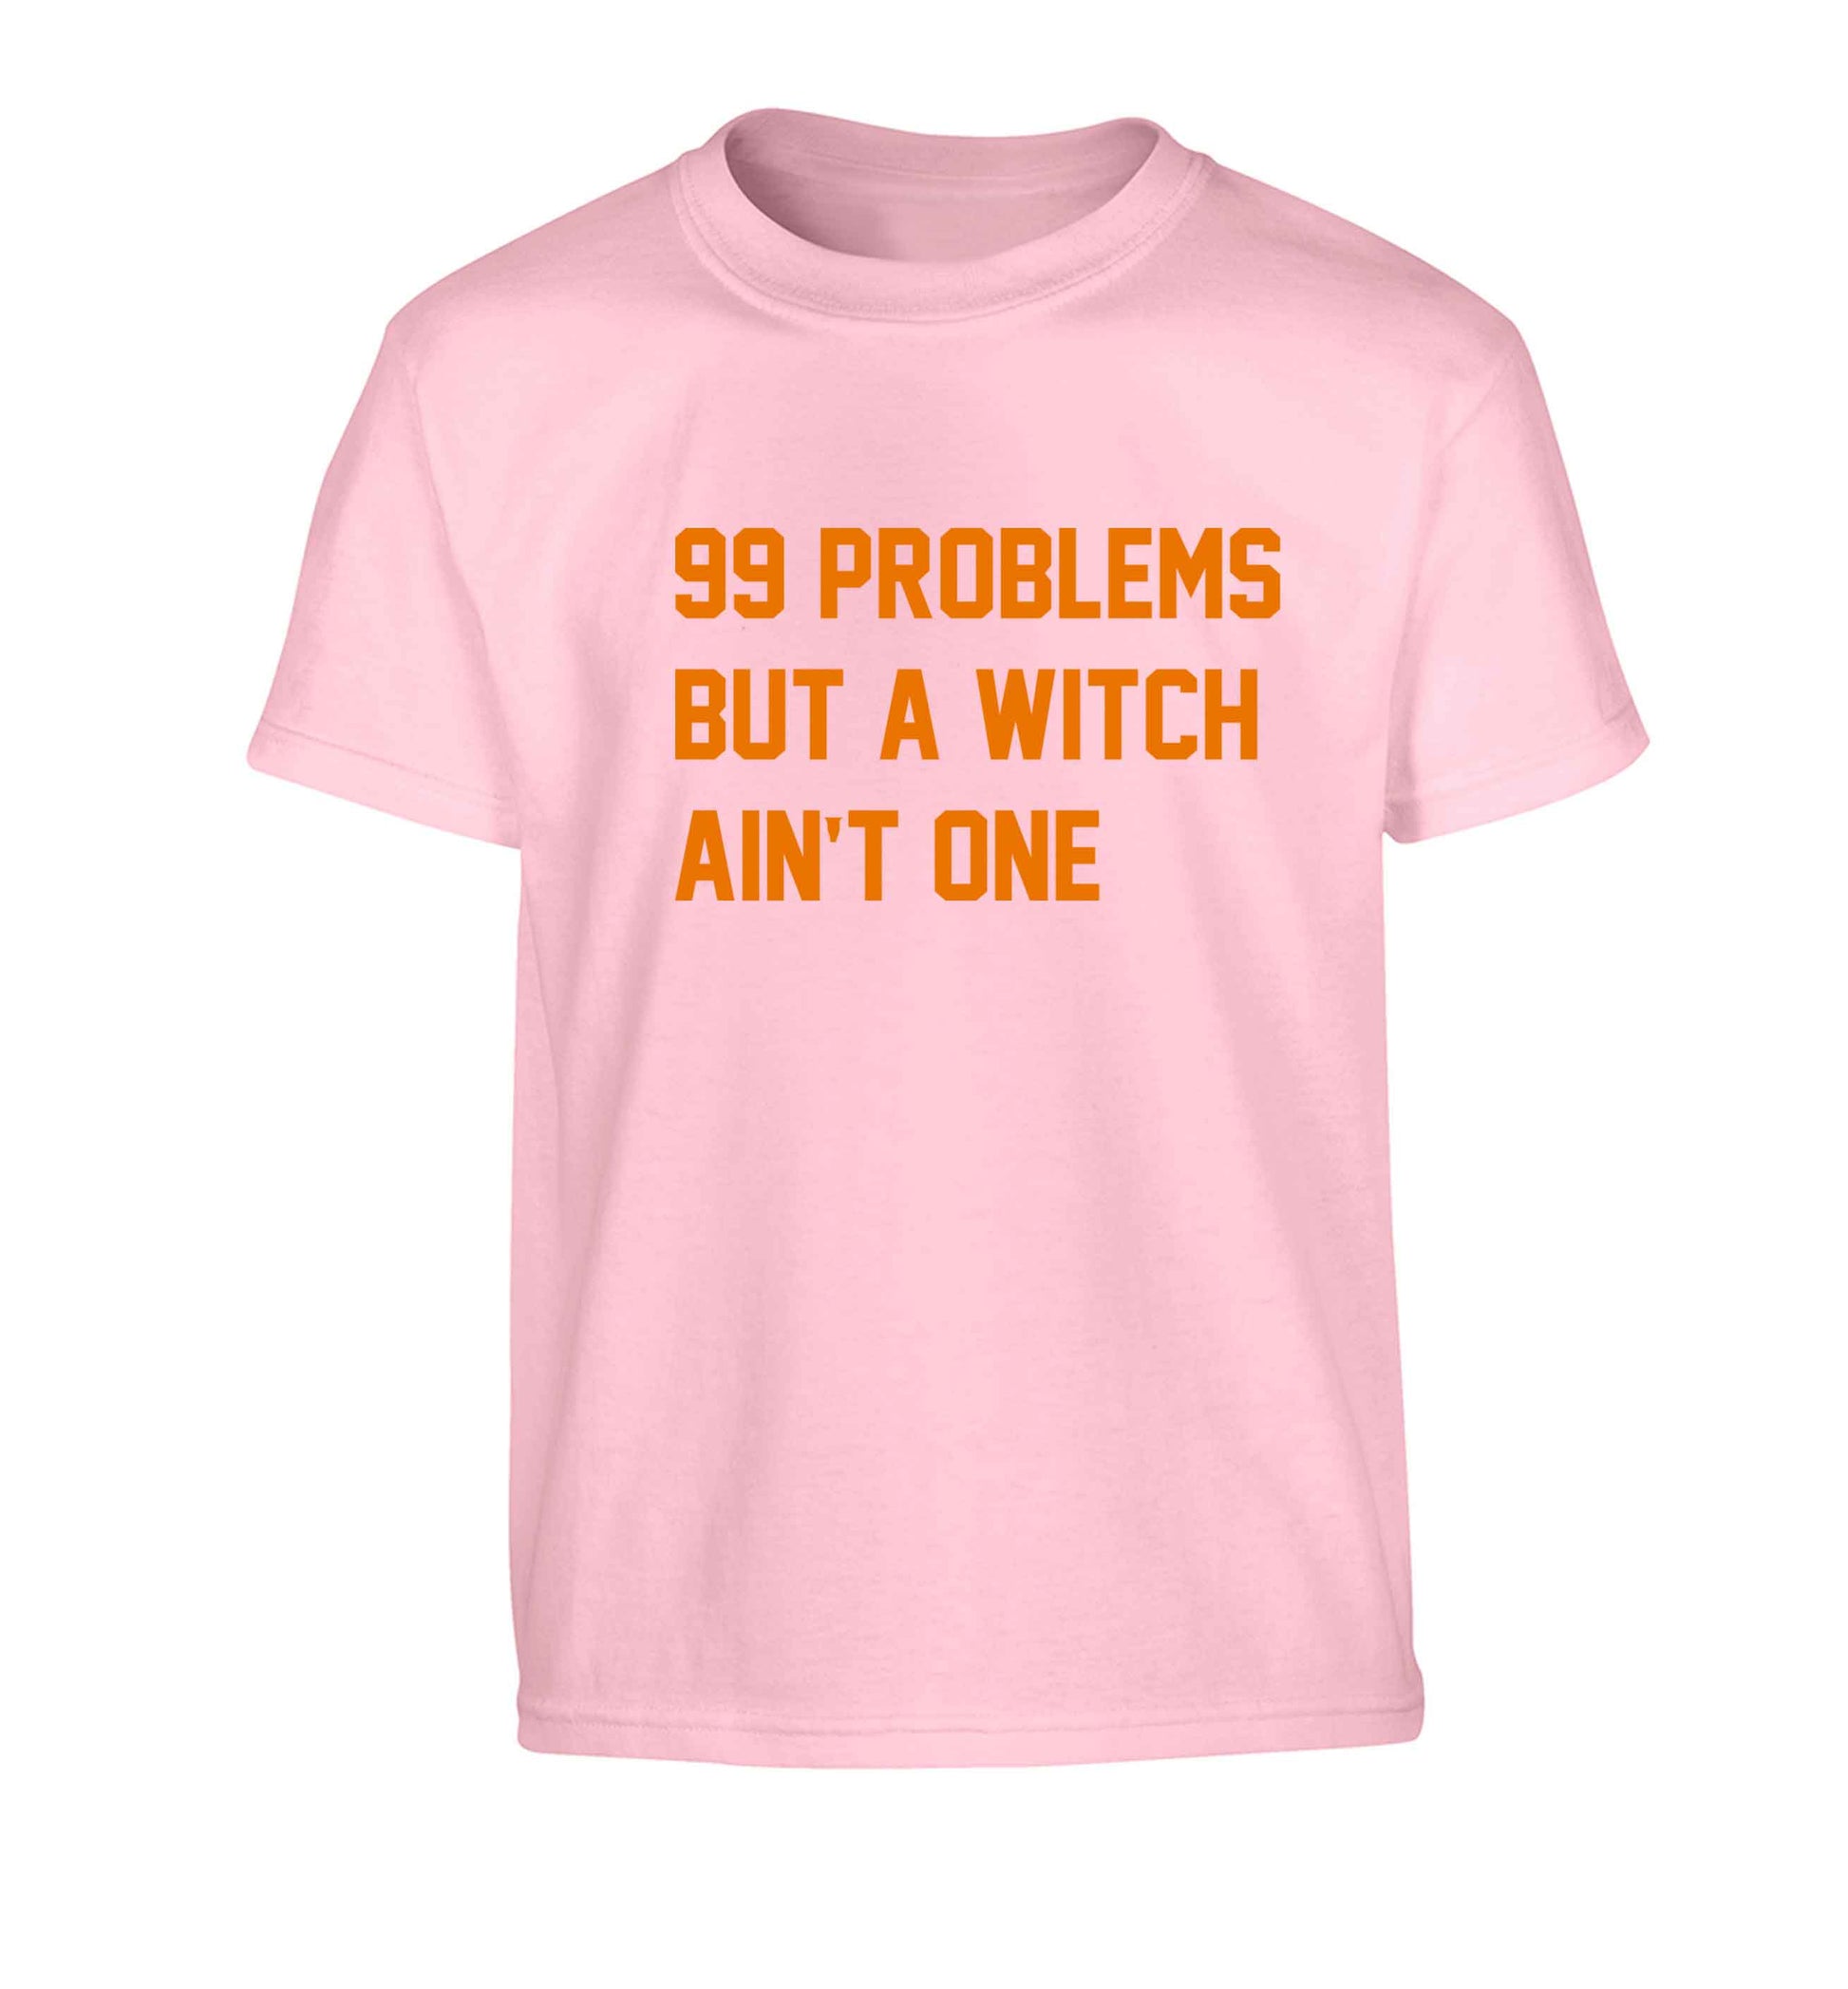 99 Problems but a witch aint one Children's light pink Tshirt 12-13 Years